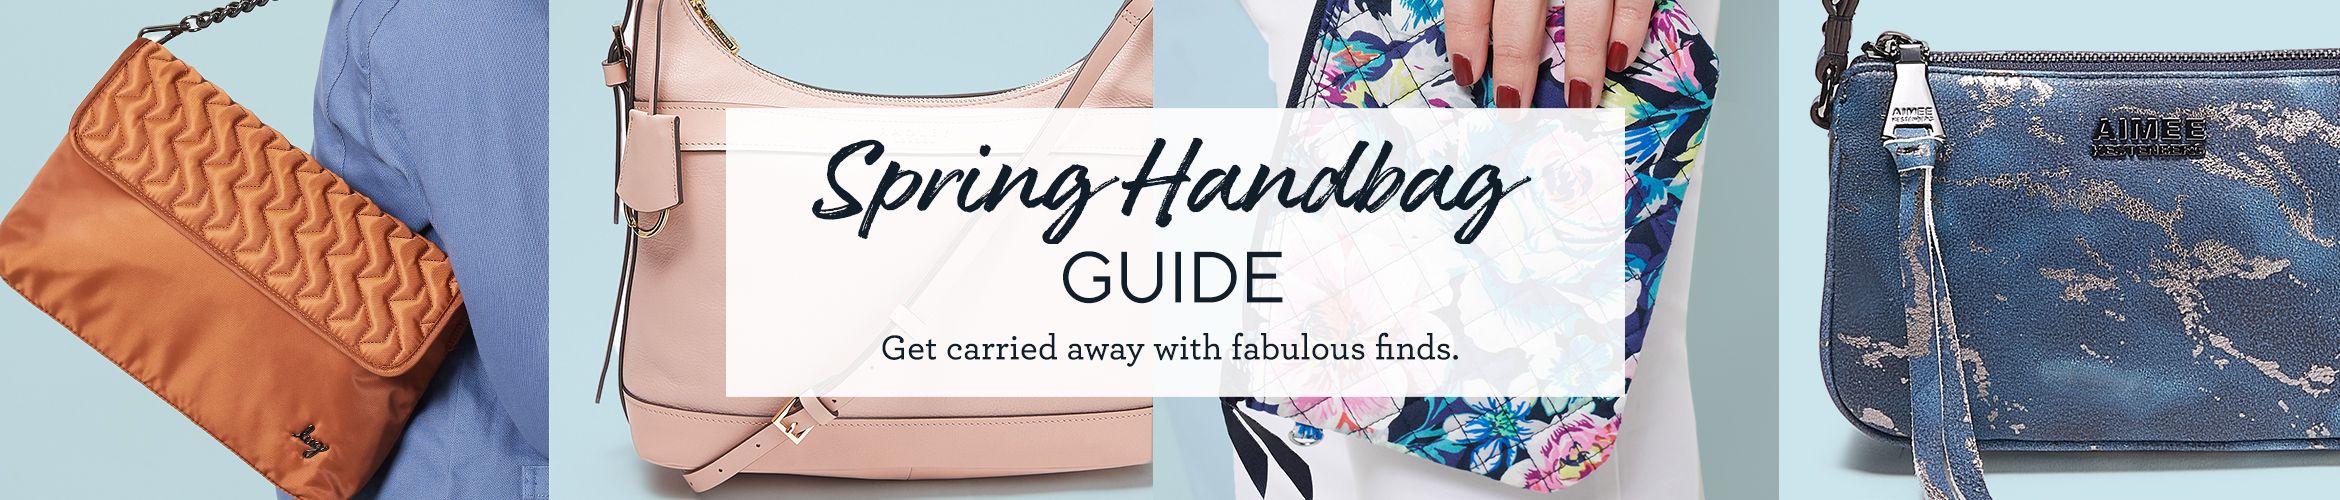 Spring Handbag Guide.  Get carried away with fabulous finds.